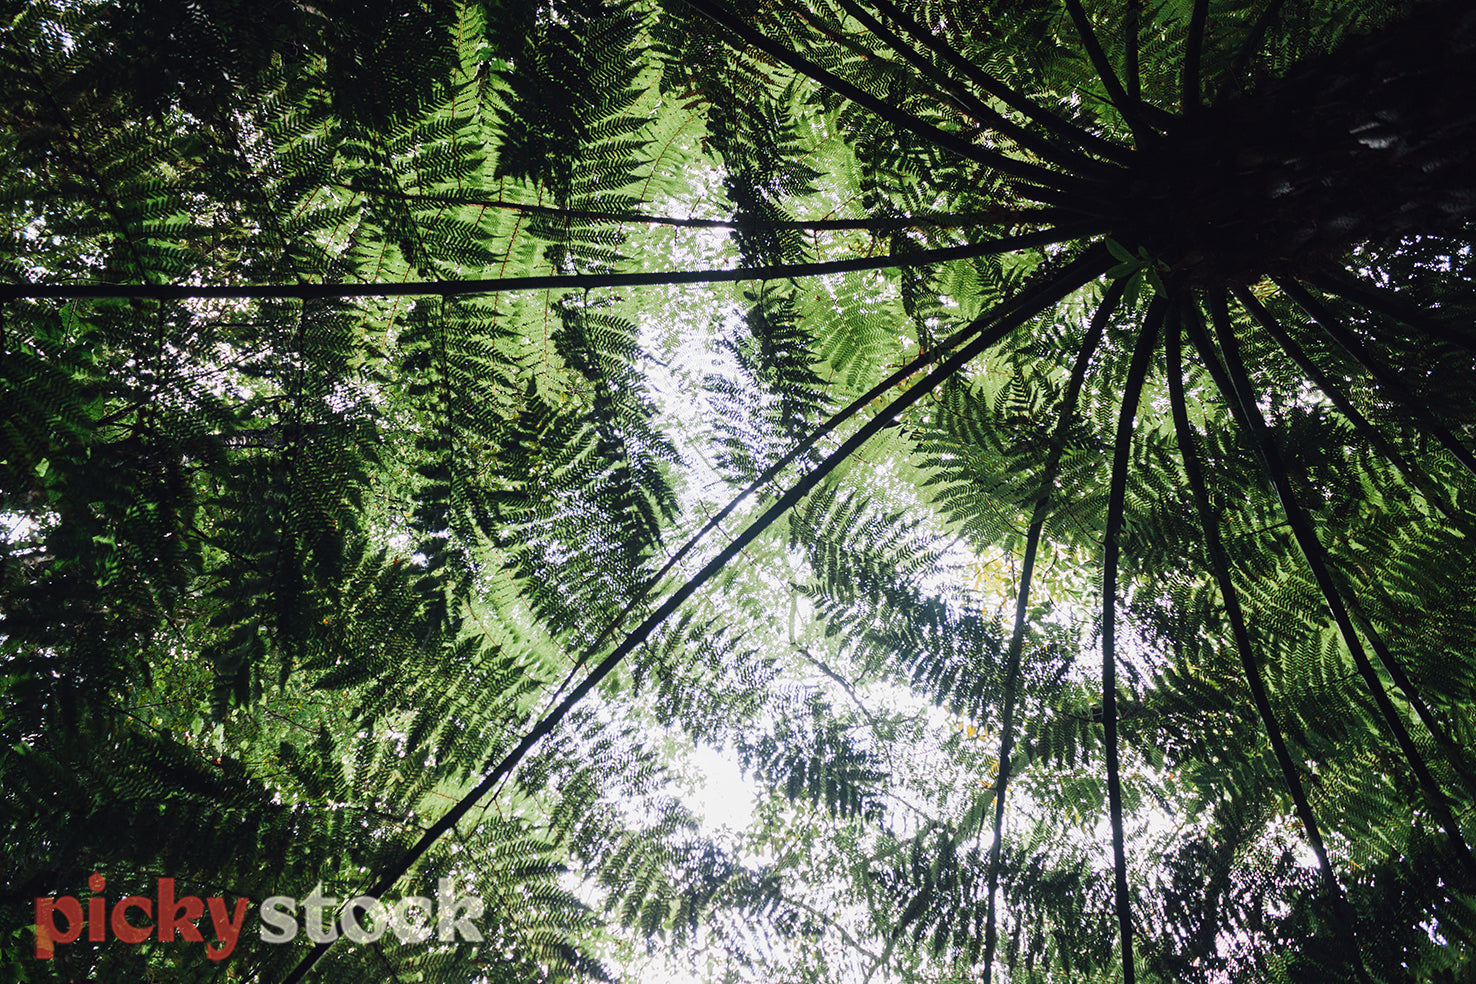 Looking up into the roof of a fern